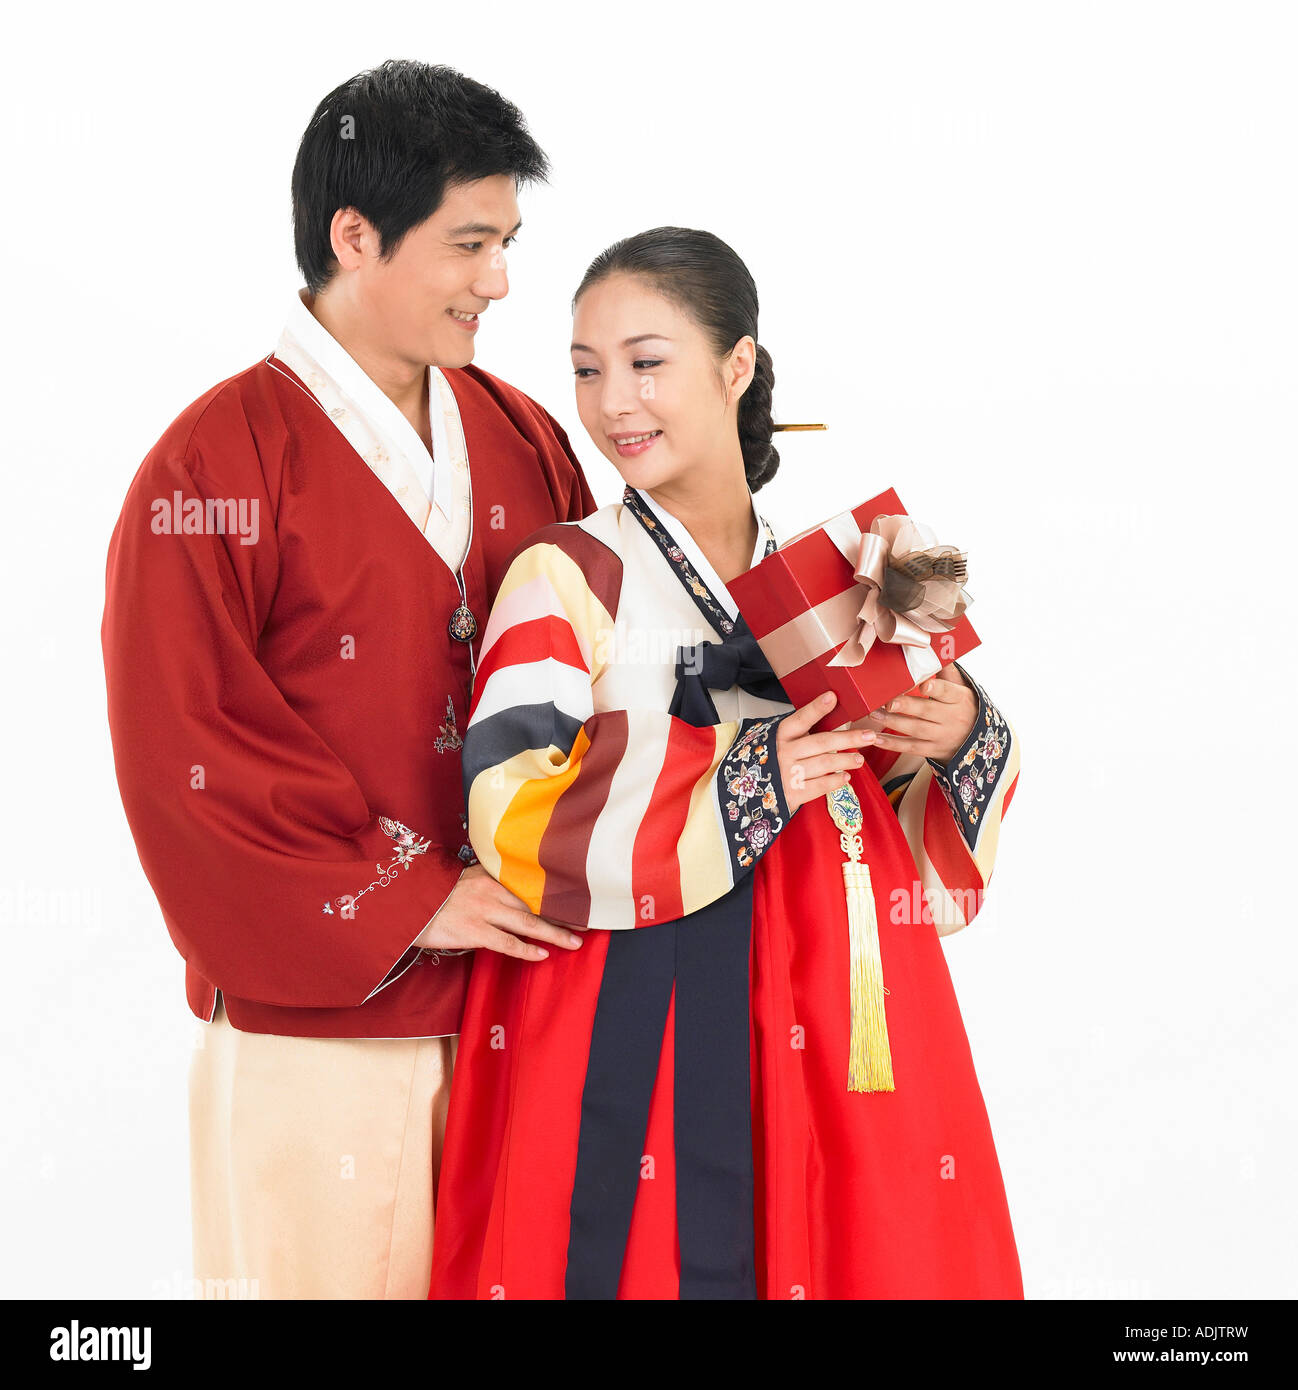 A Korean man and a woman wearing Hanboek is holding a gift box Stock Photo